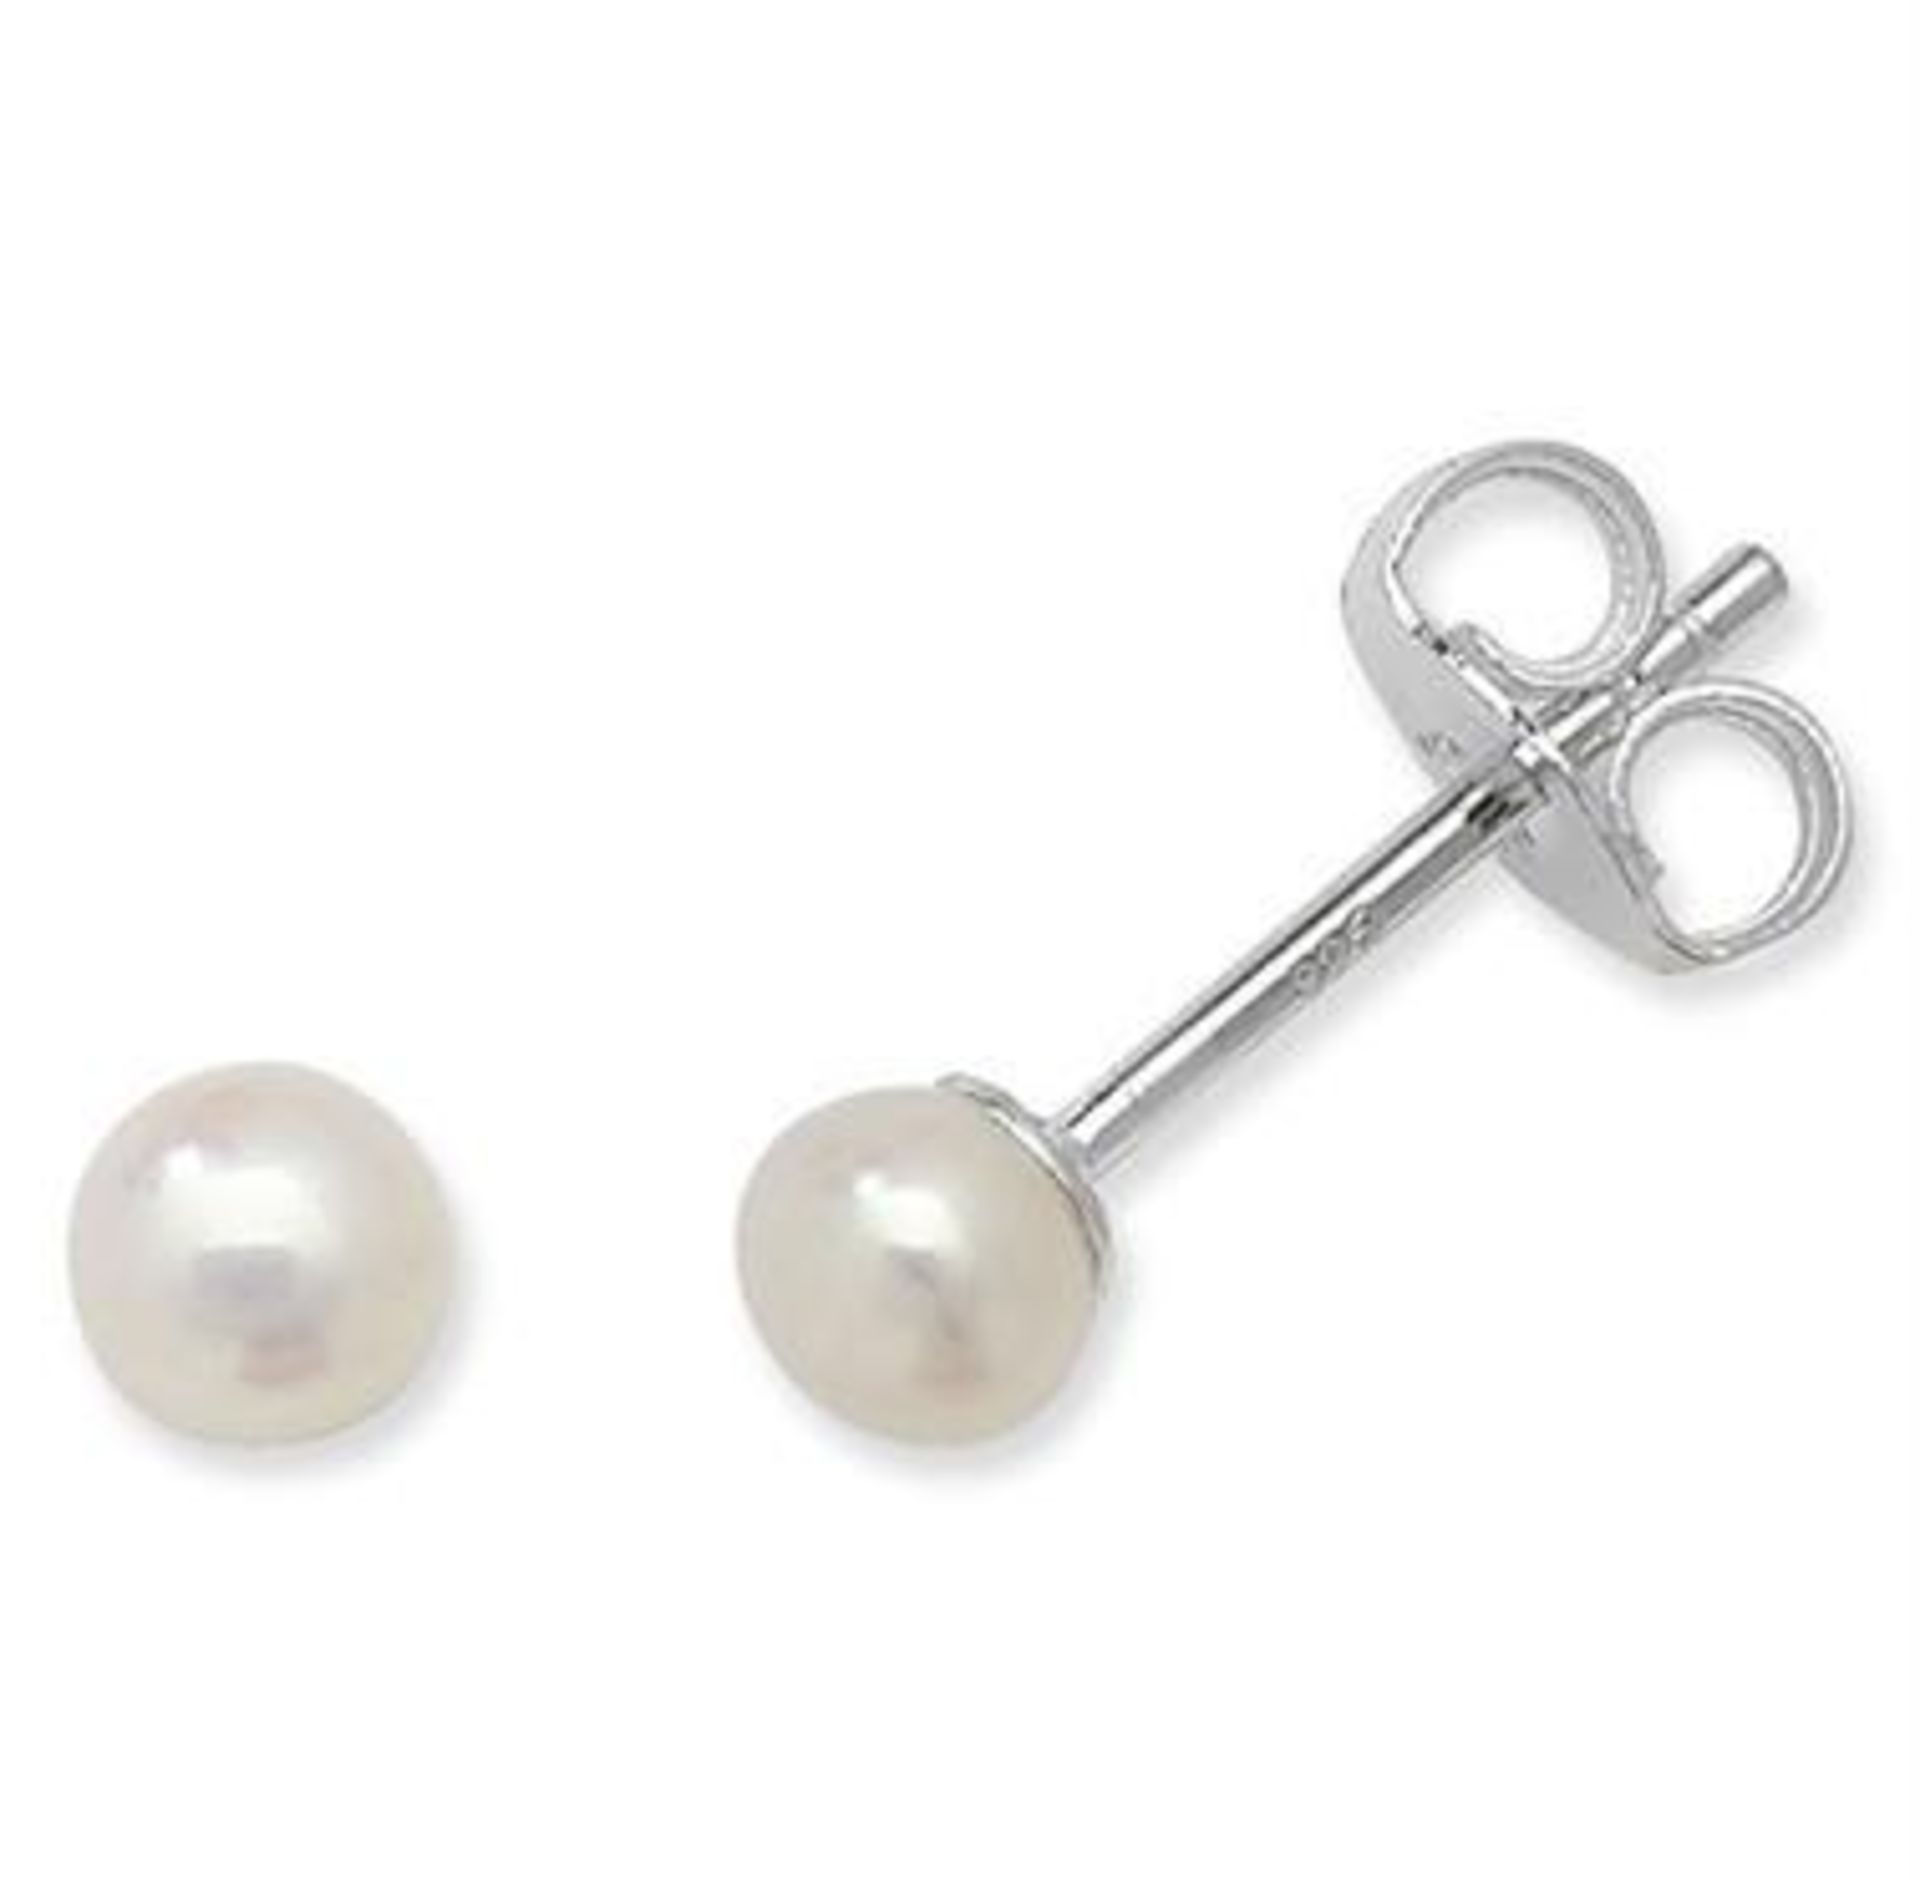 Trade quantity - 5 x Genuine 5mm freshwater pearl stud earrings on sterling silver. Brand new